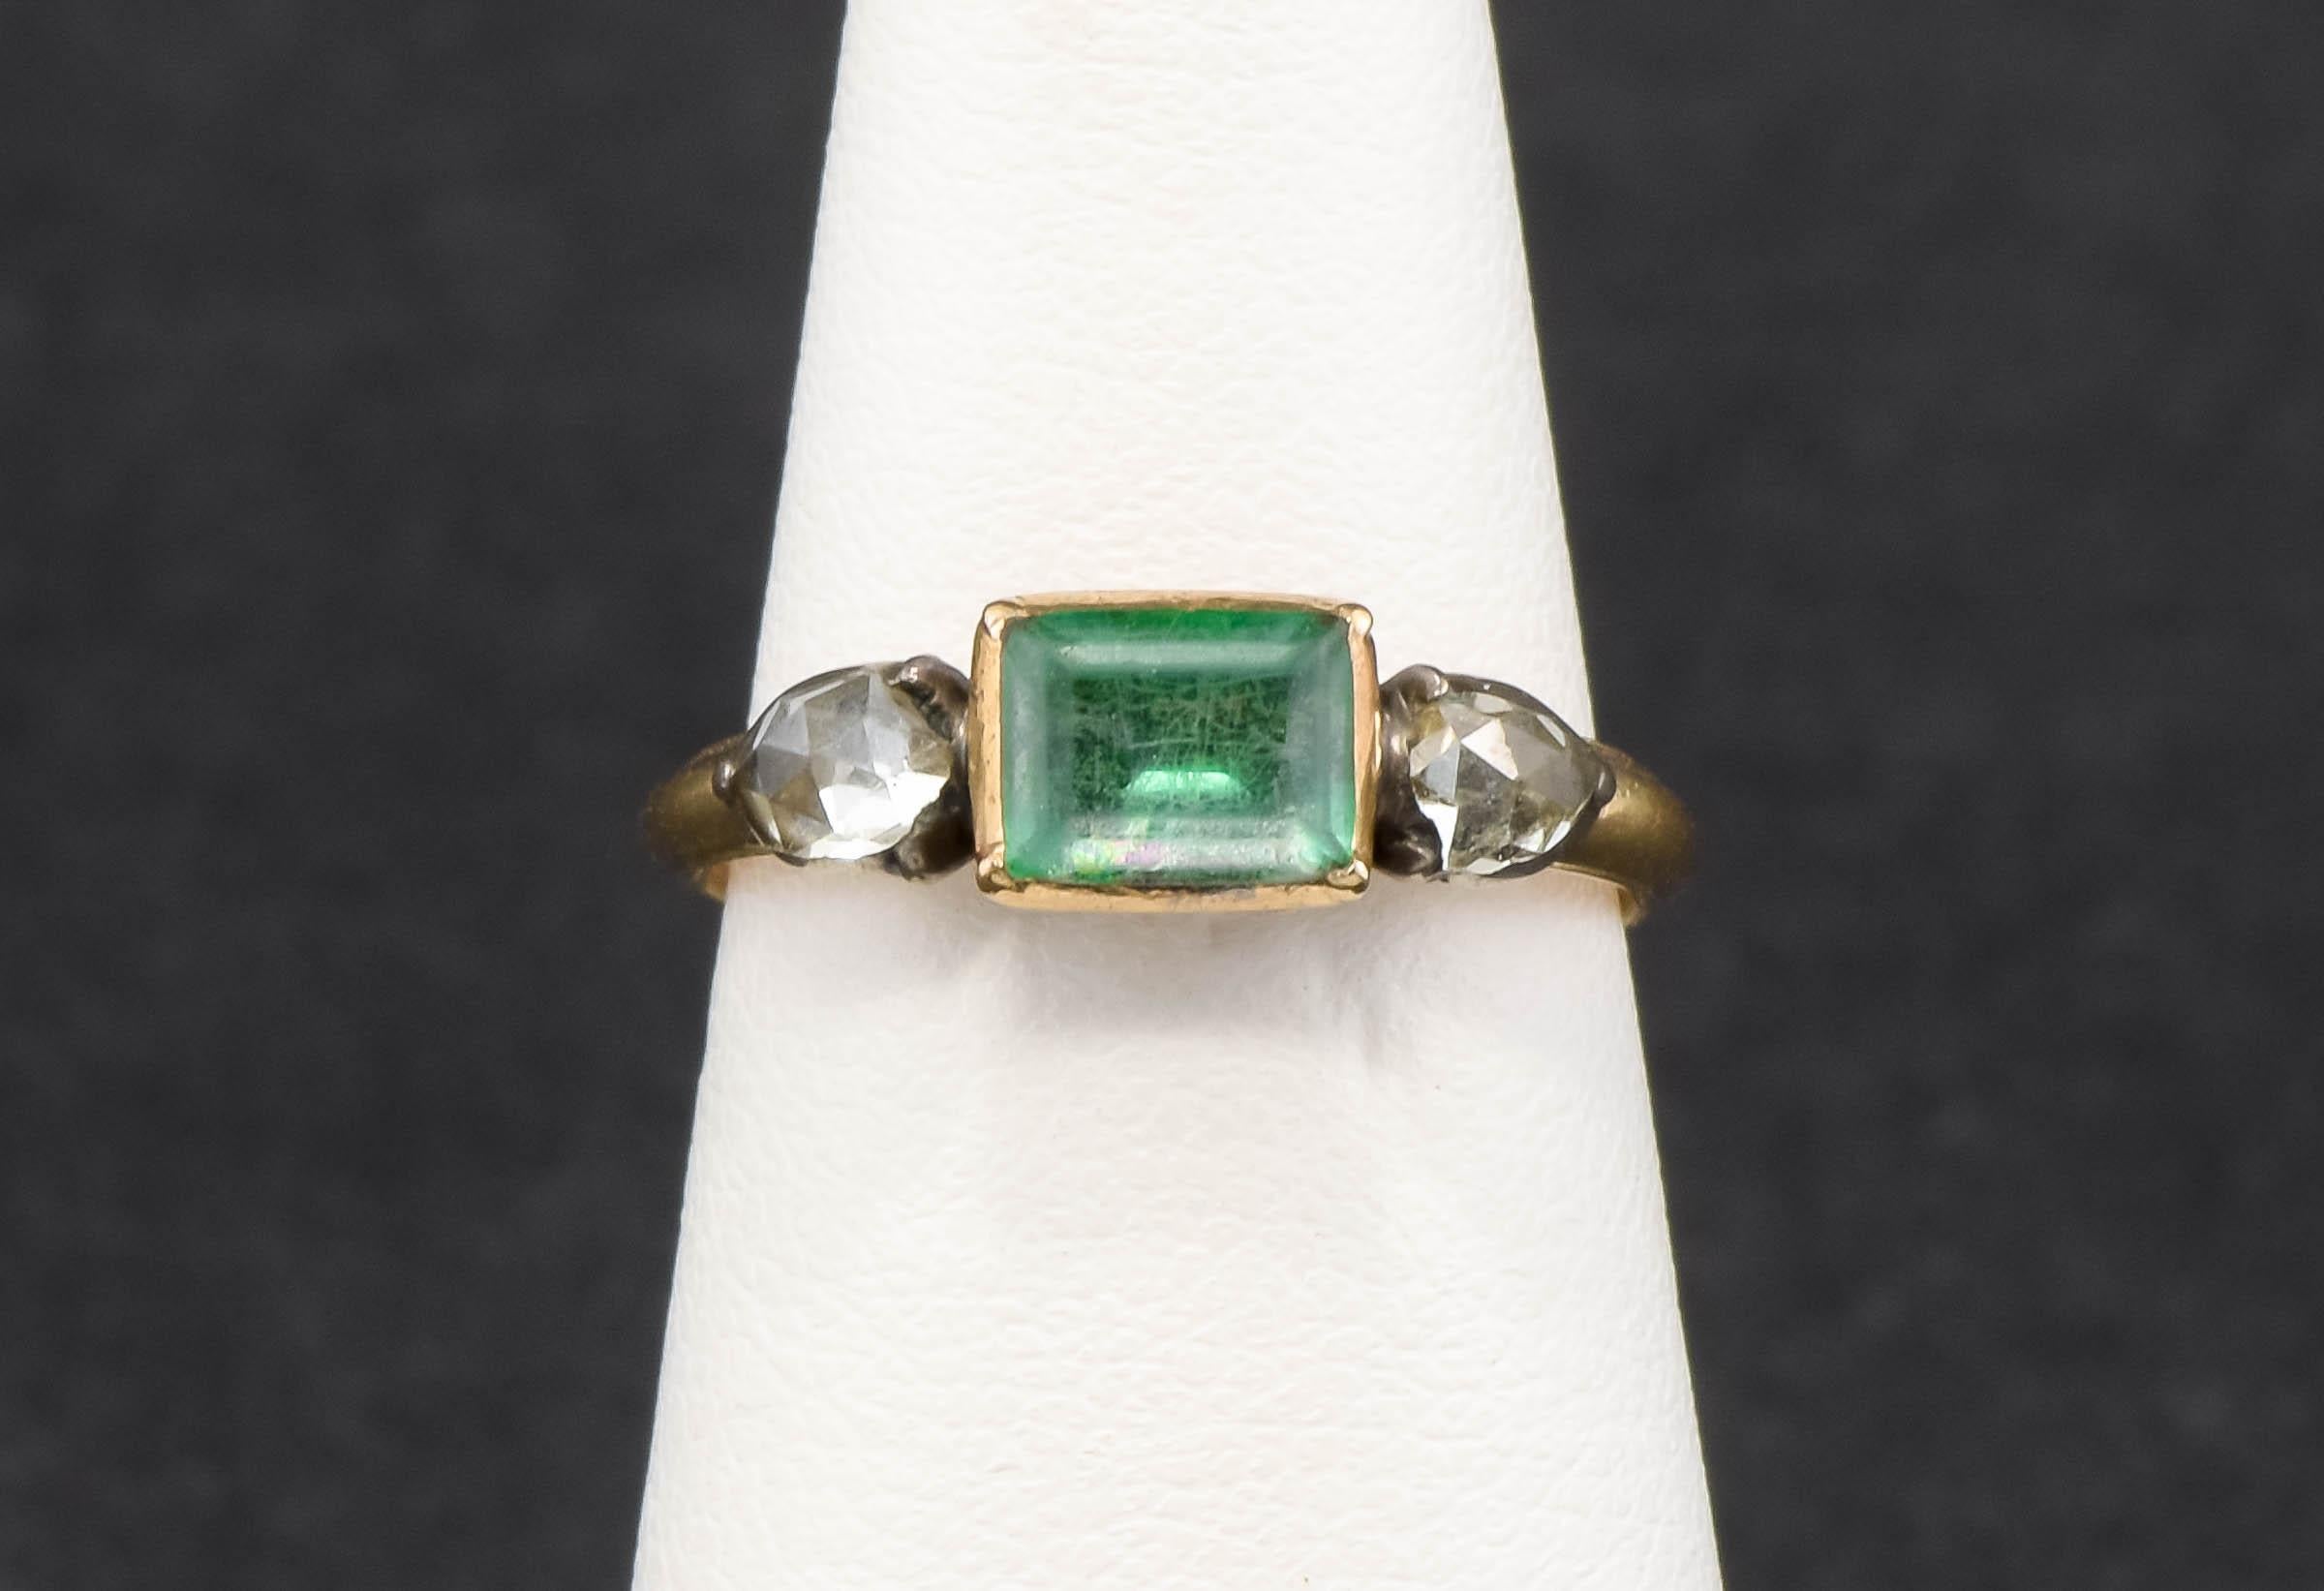 Crafted of gold testing around 18K, with silver collets holding the diamonds, the ring features a rectangular table cut rock crystal backed by green foil to the center, flanked by super chunky rose cut diamonds. In wonderful condition, this ring